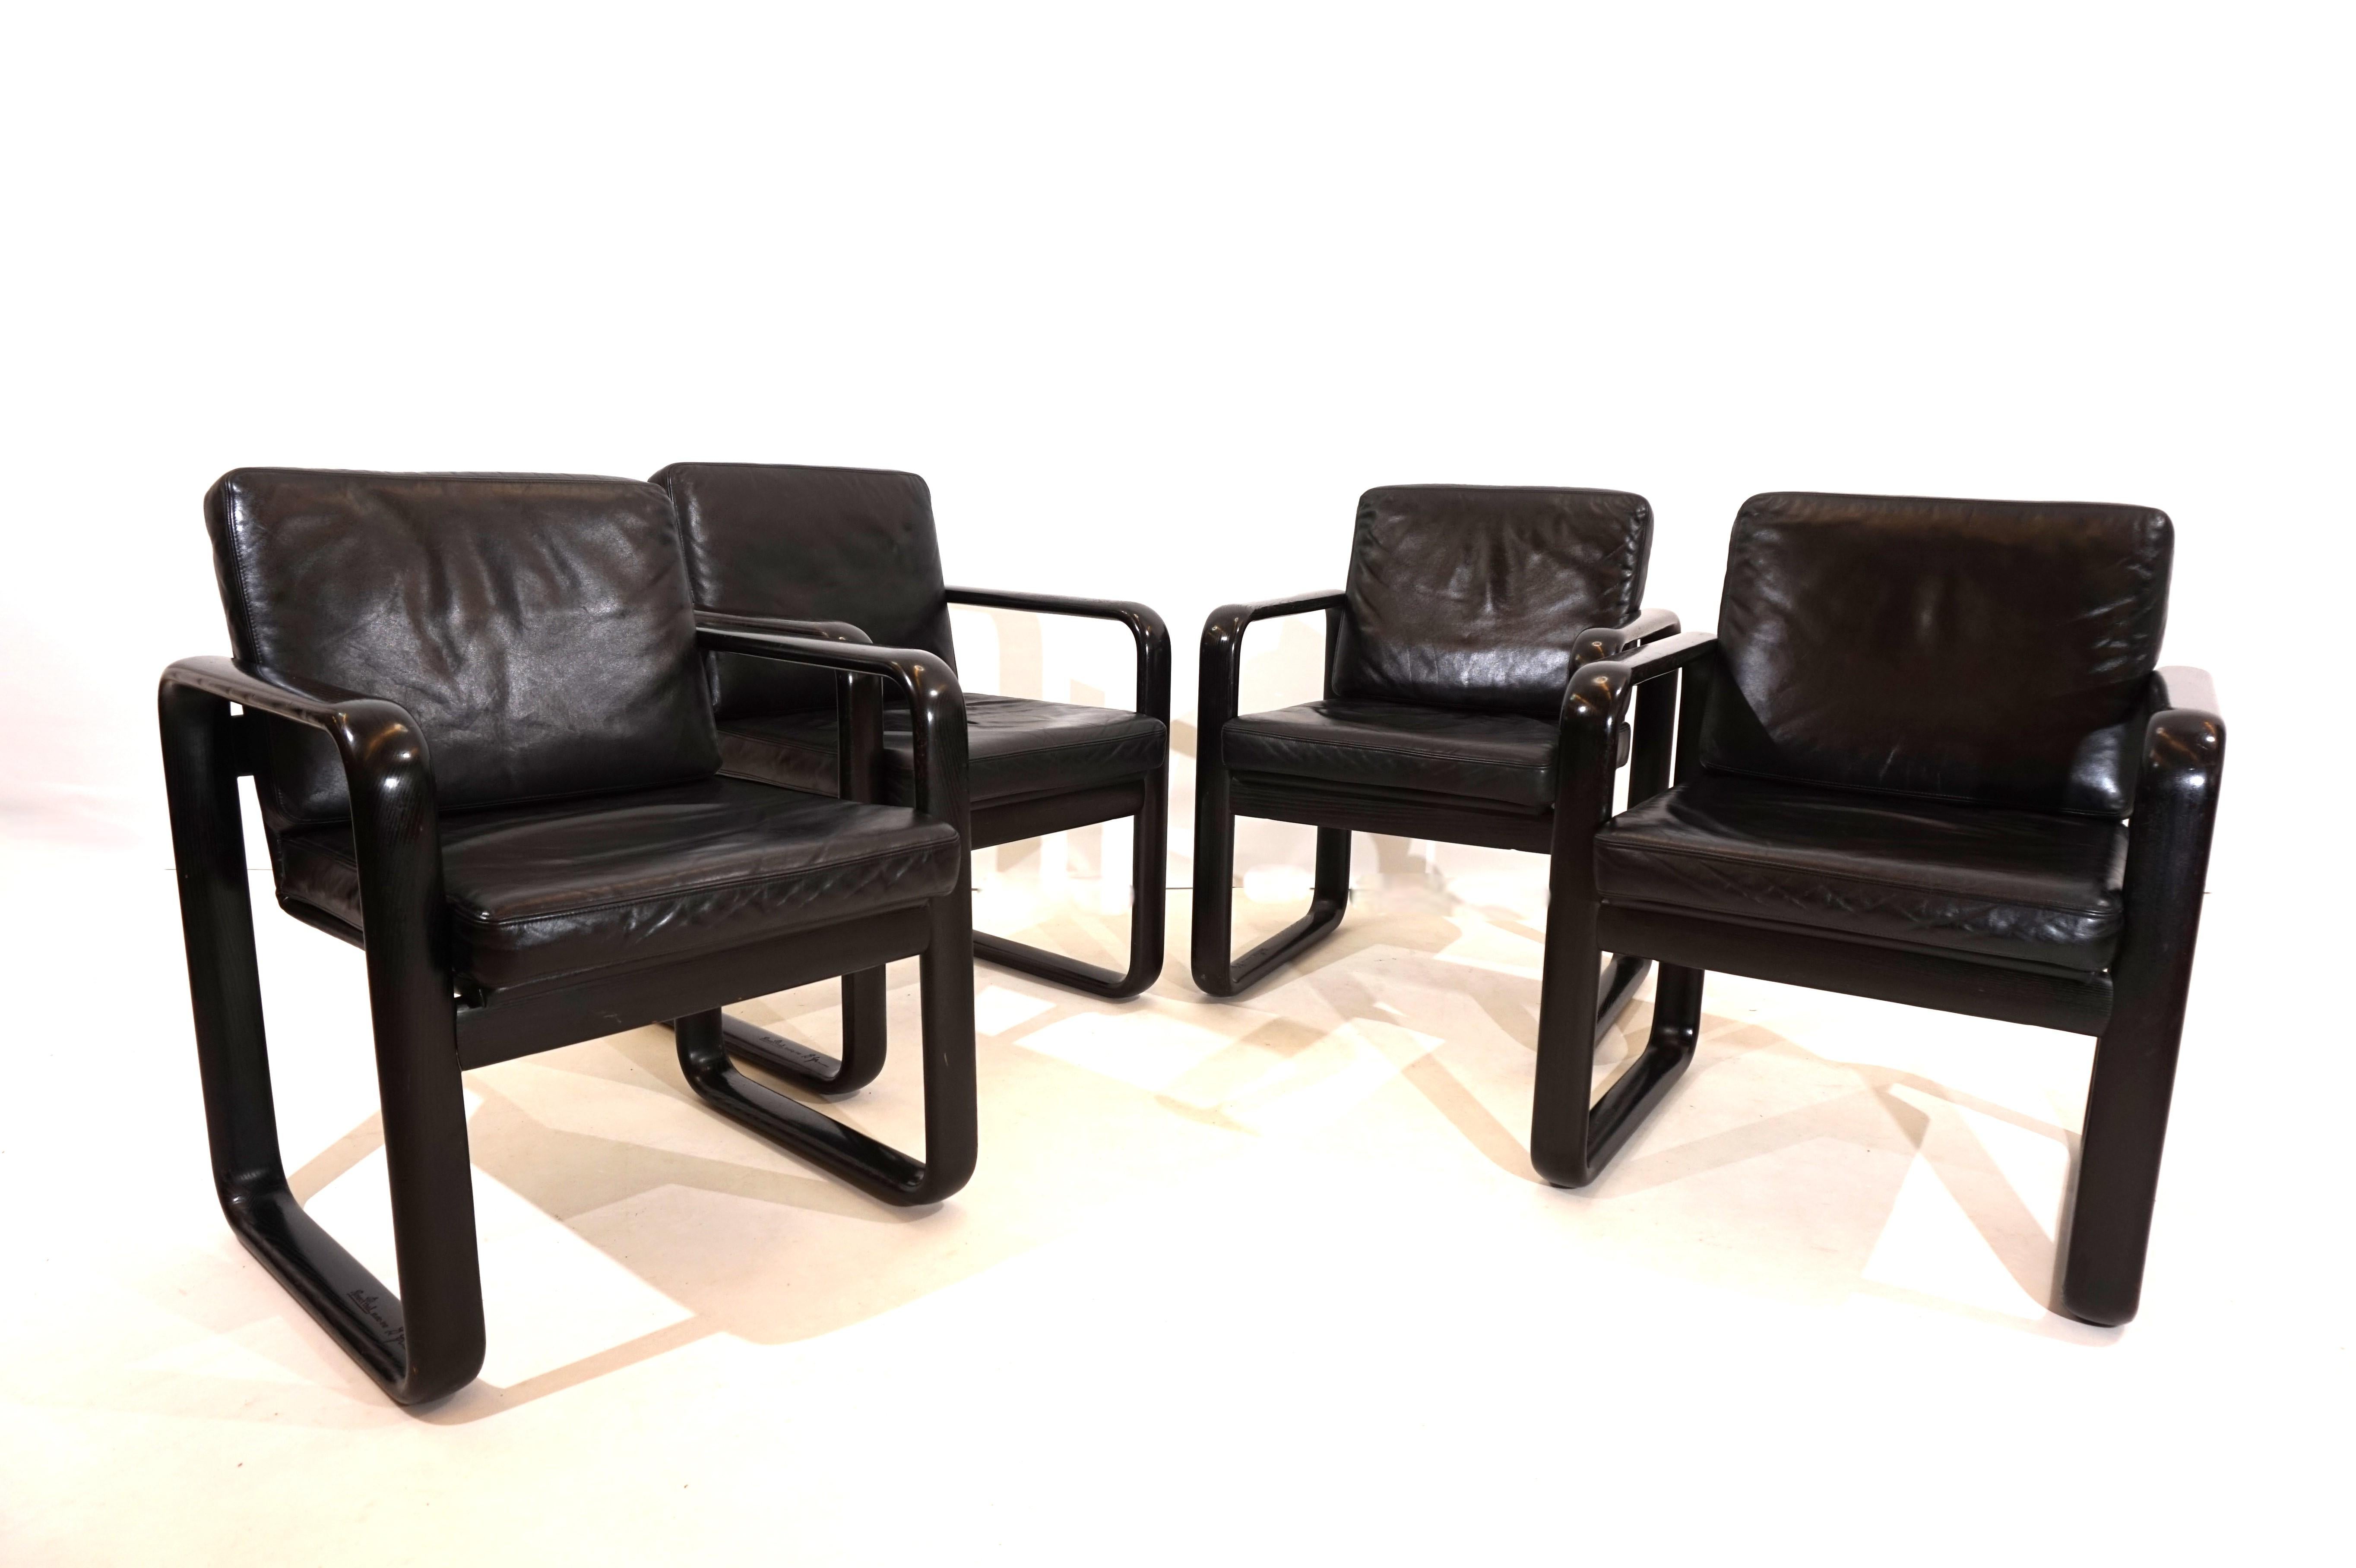 Set of 4 Rosenthal Hombre leather dining chairs by Burkhard Vogtherr 1